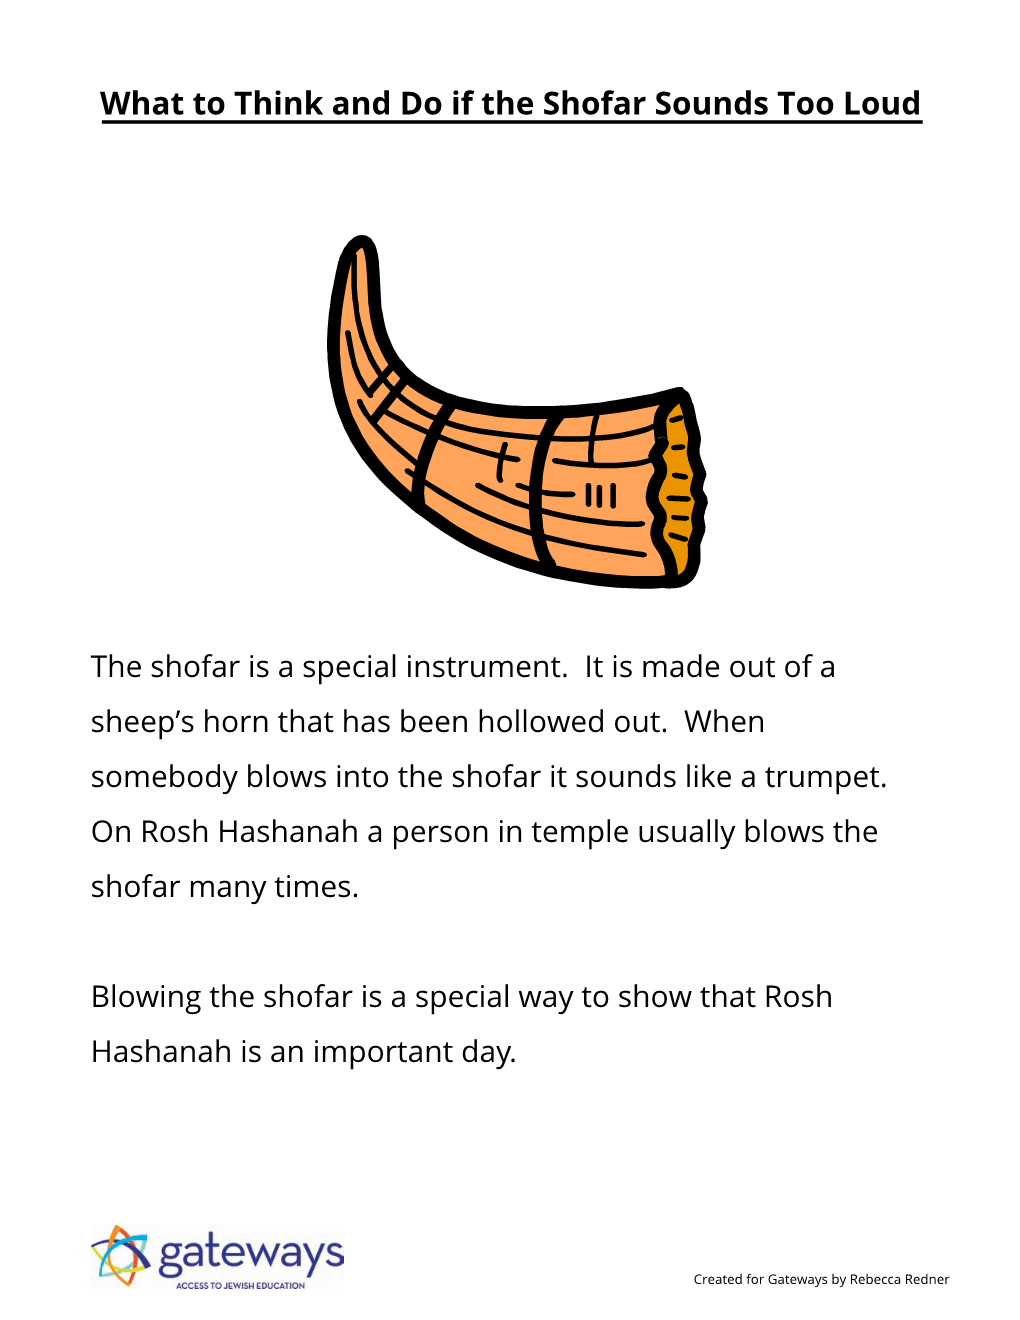 9. What to Think and Do If the Shofar Sounds Too Loud